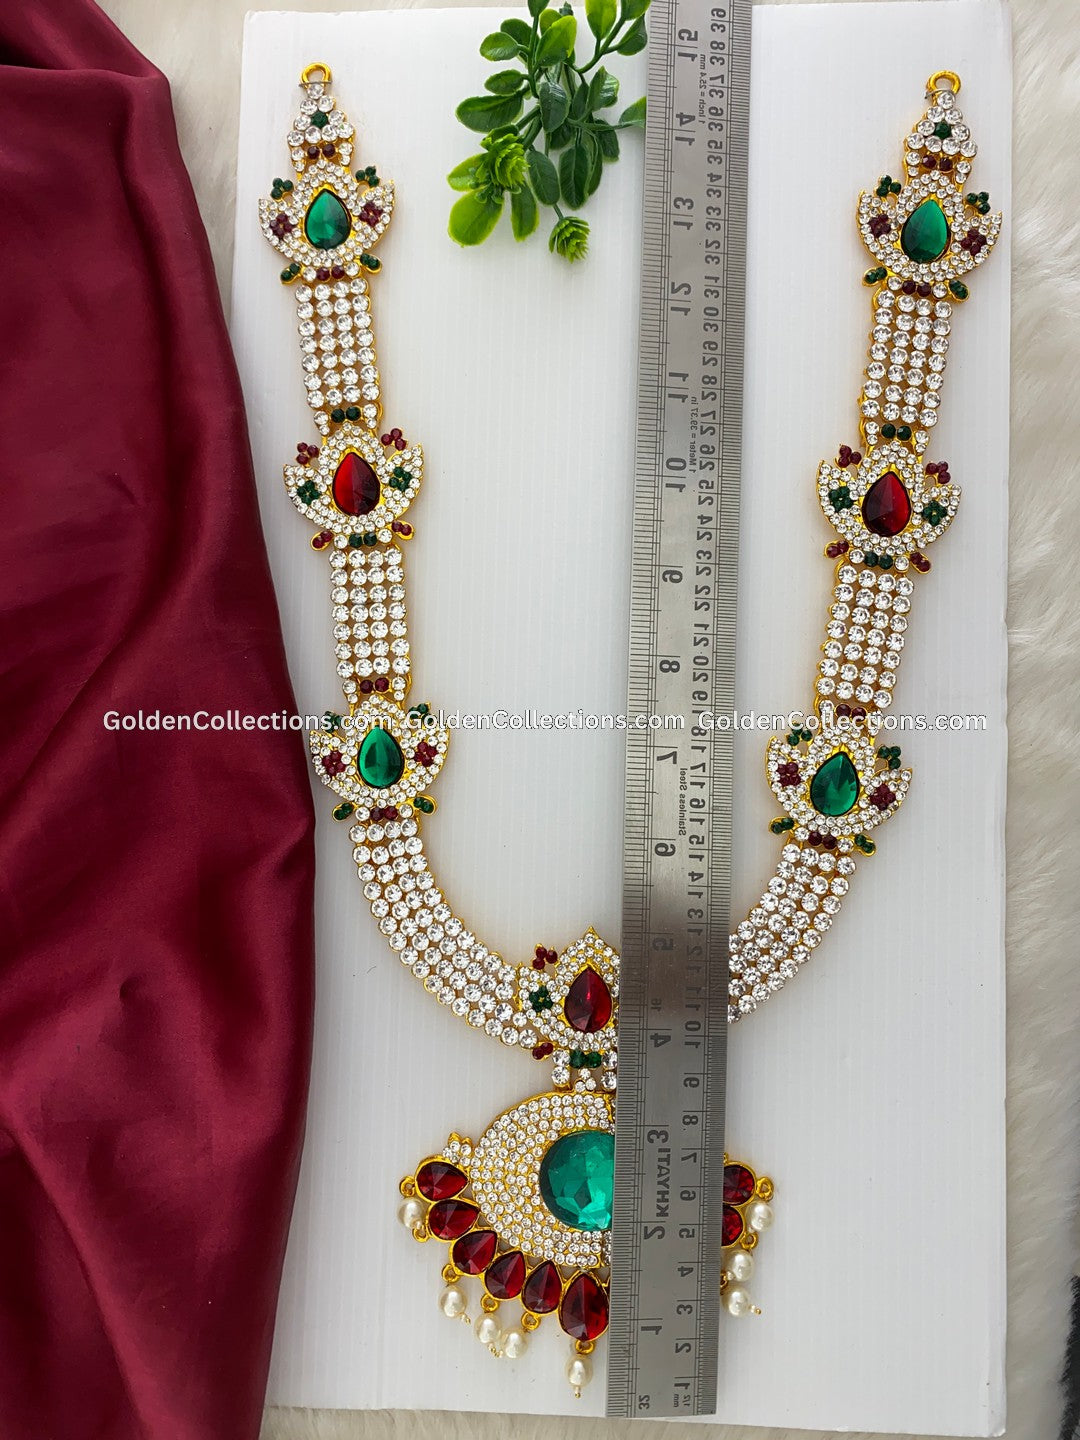 Amman Stone Necklace - GoldenCollections DLN-048 2